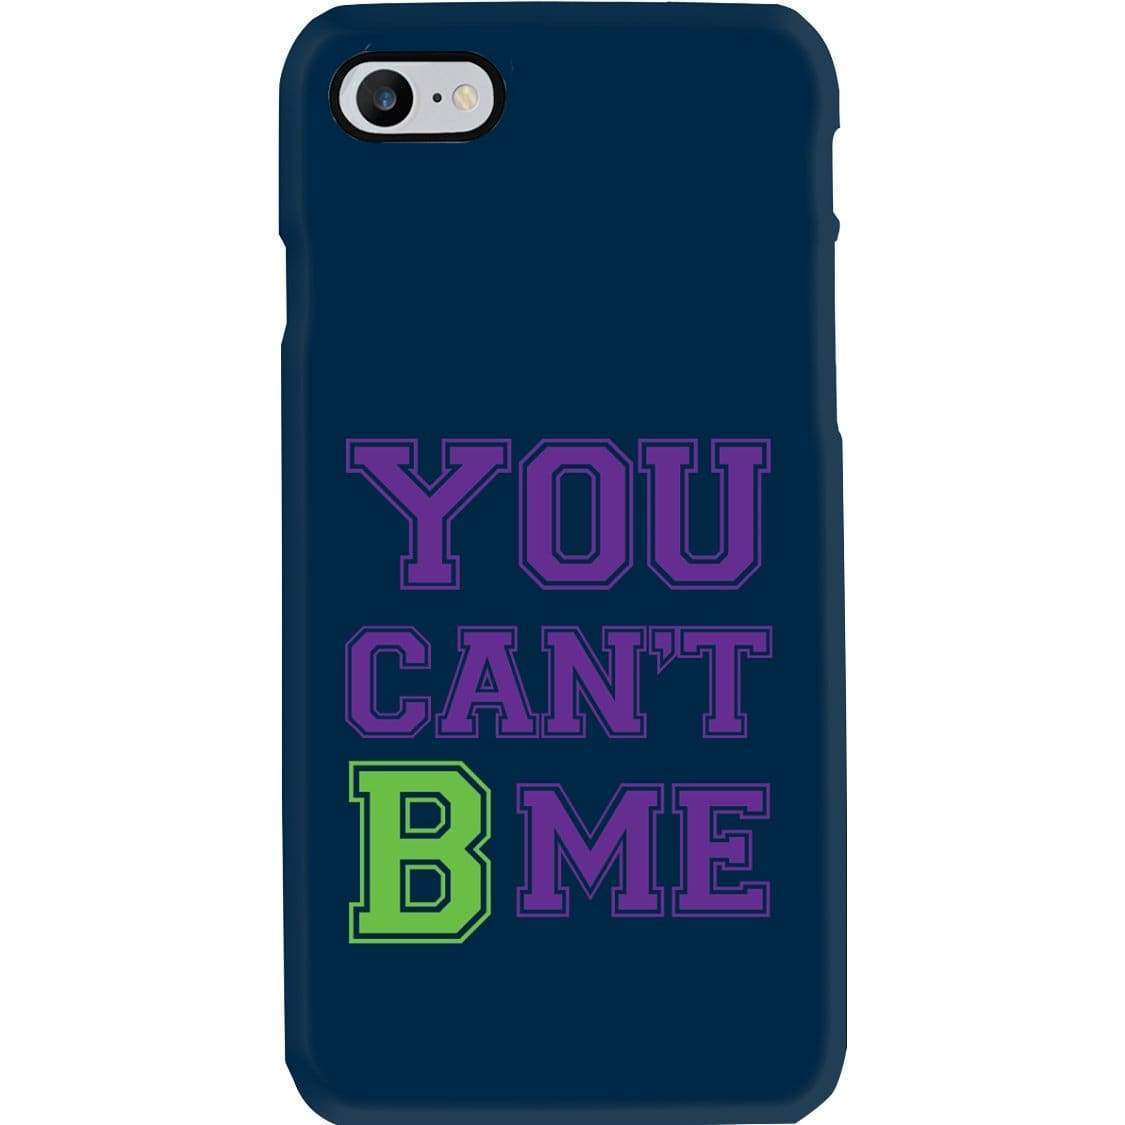 All Nerds Here You Can’t B Me Phone Case - Snap * iPhone * Samsung * - iPhone 7 Case / Gloss / Apparel